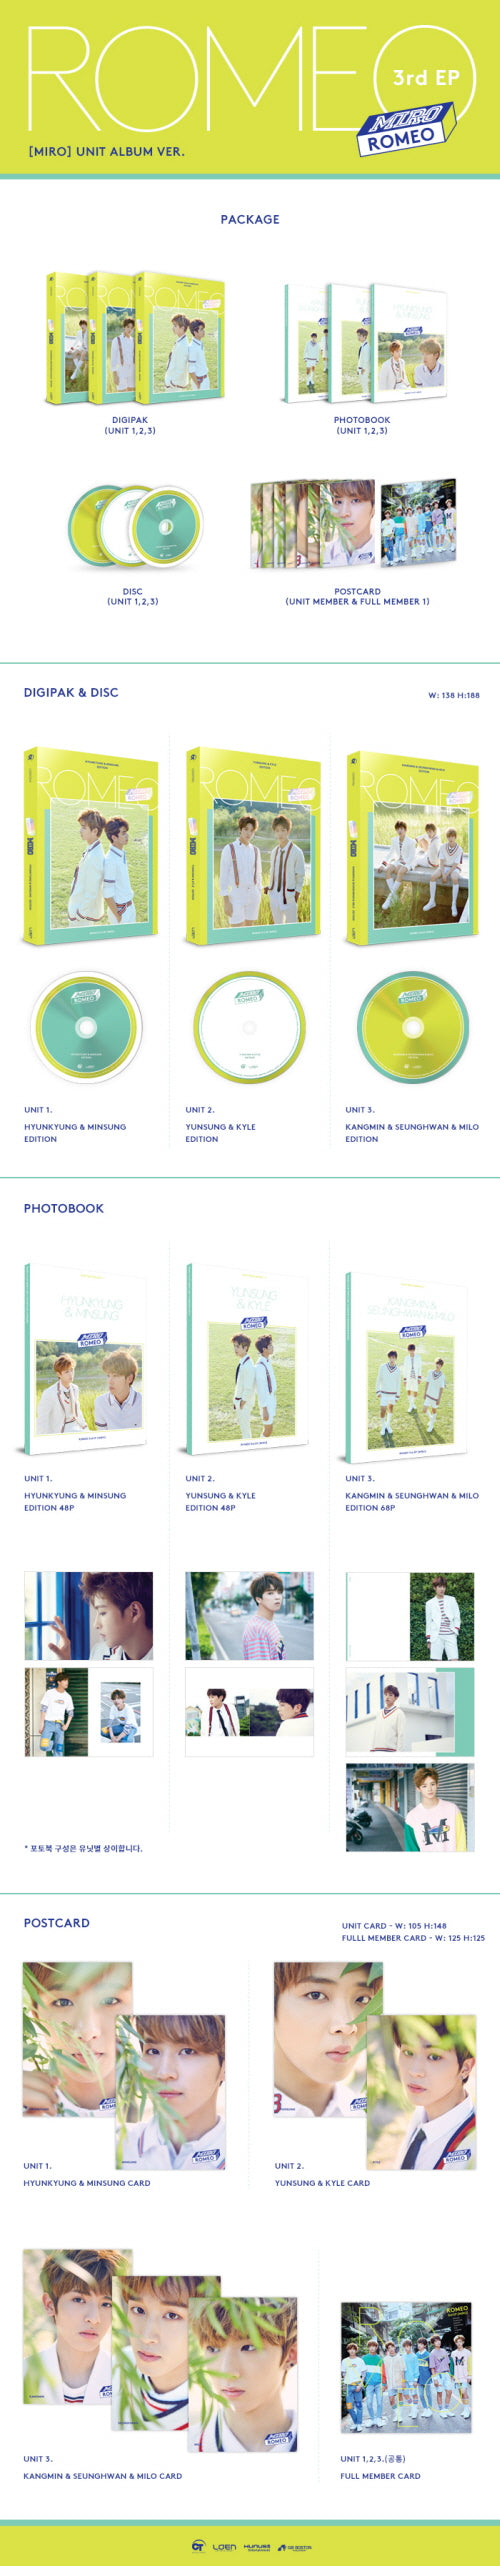 1 CD
1 Photo Book (44 pages)
1 Post Card